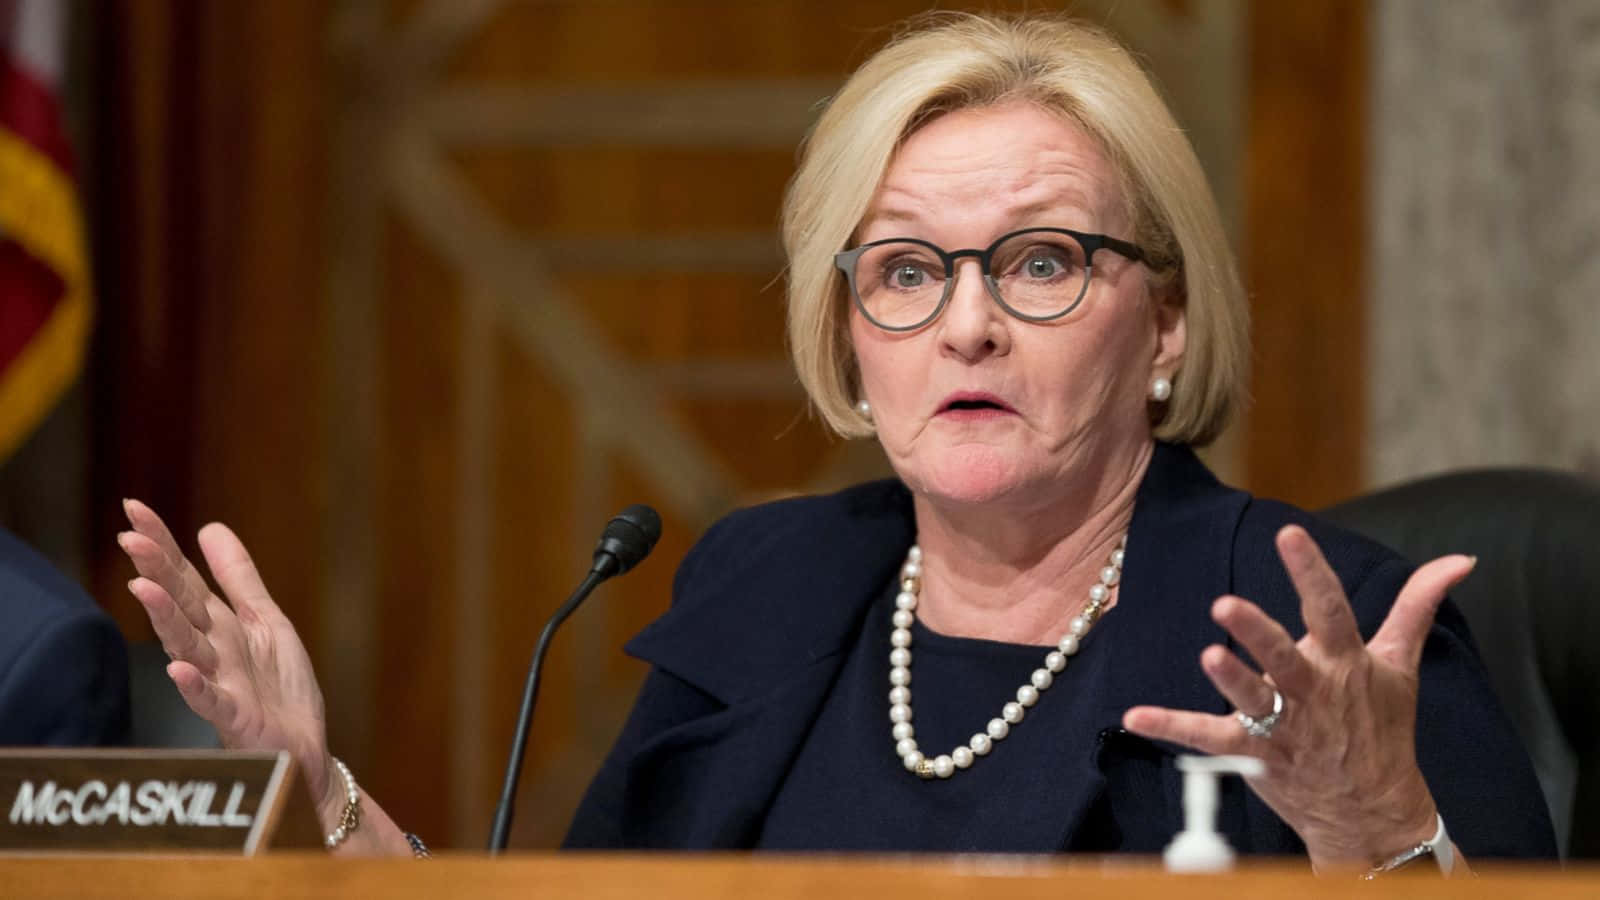 Claire Mccaskill With Open Palms Background